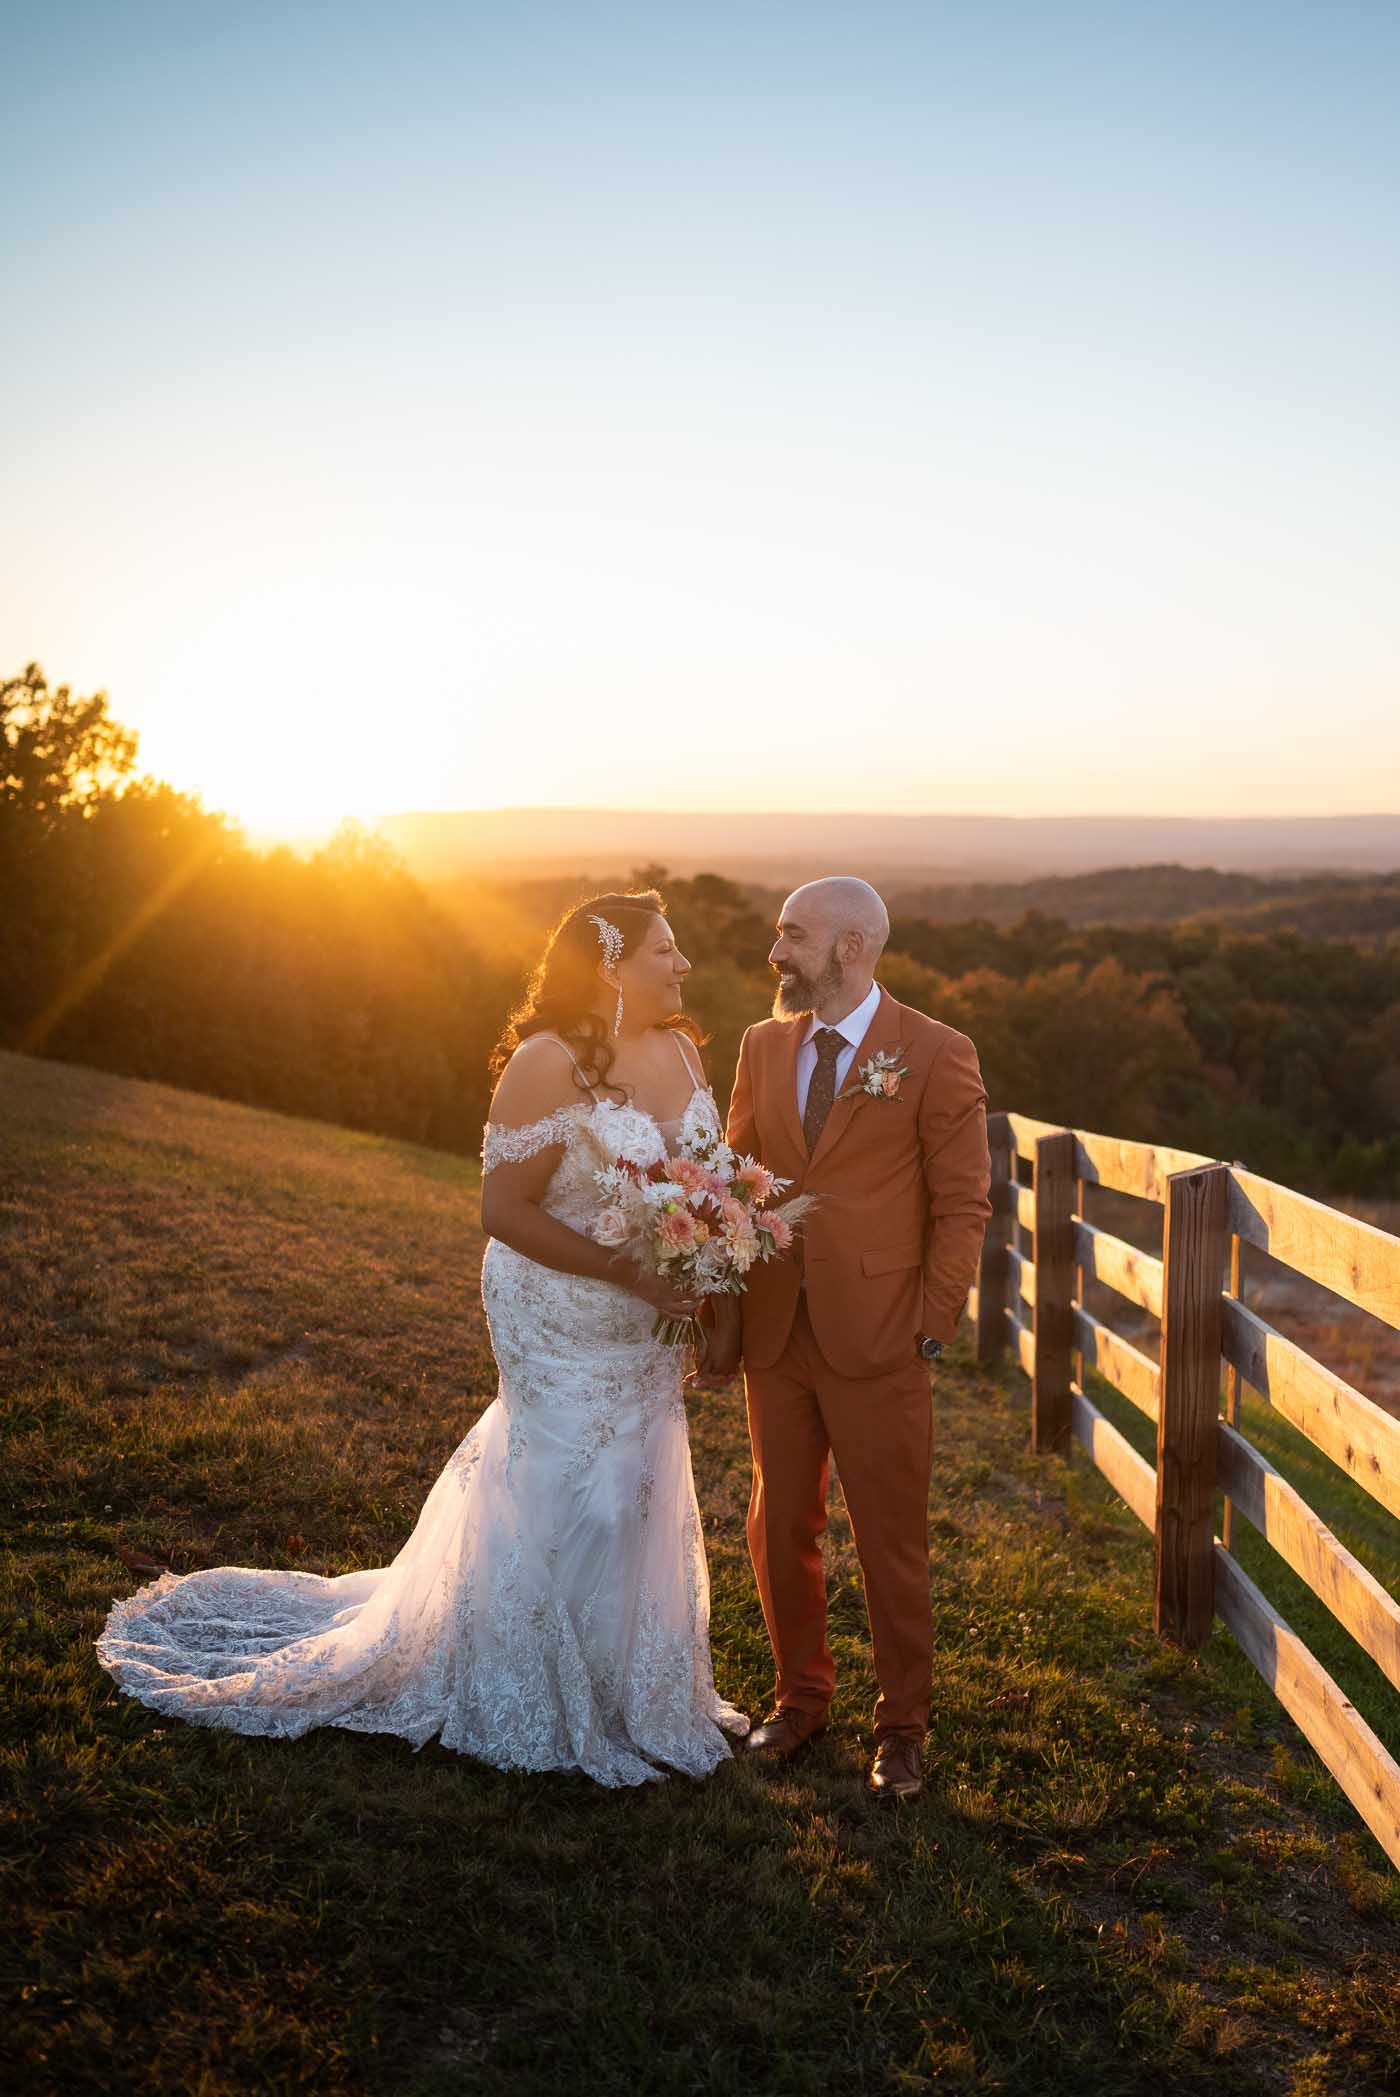 Bride and groom posing at sunset